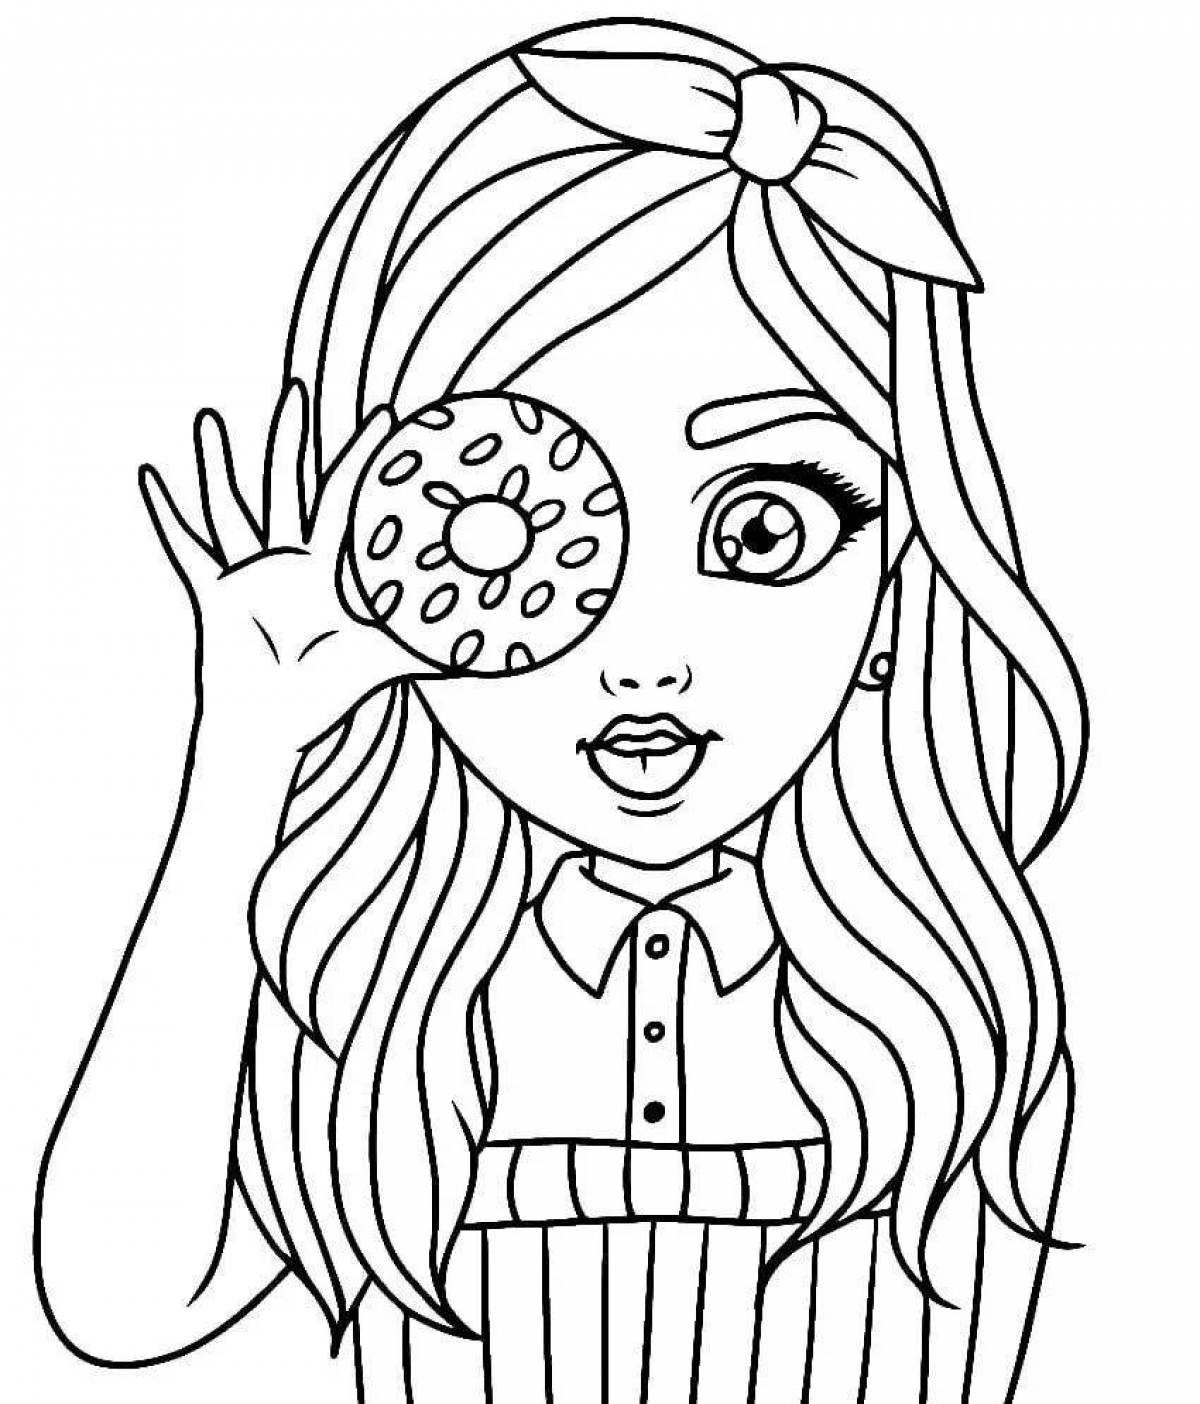 Delightful coloring pages for girls 10 years beautiful